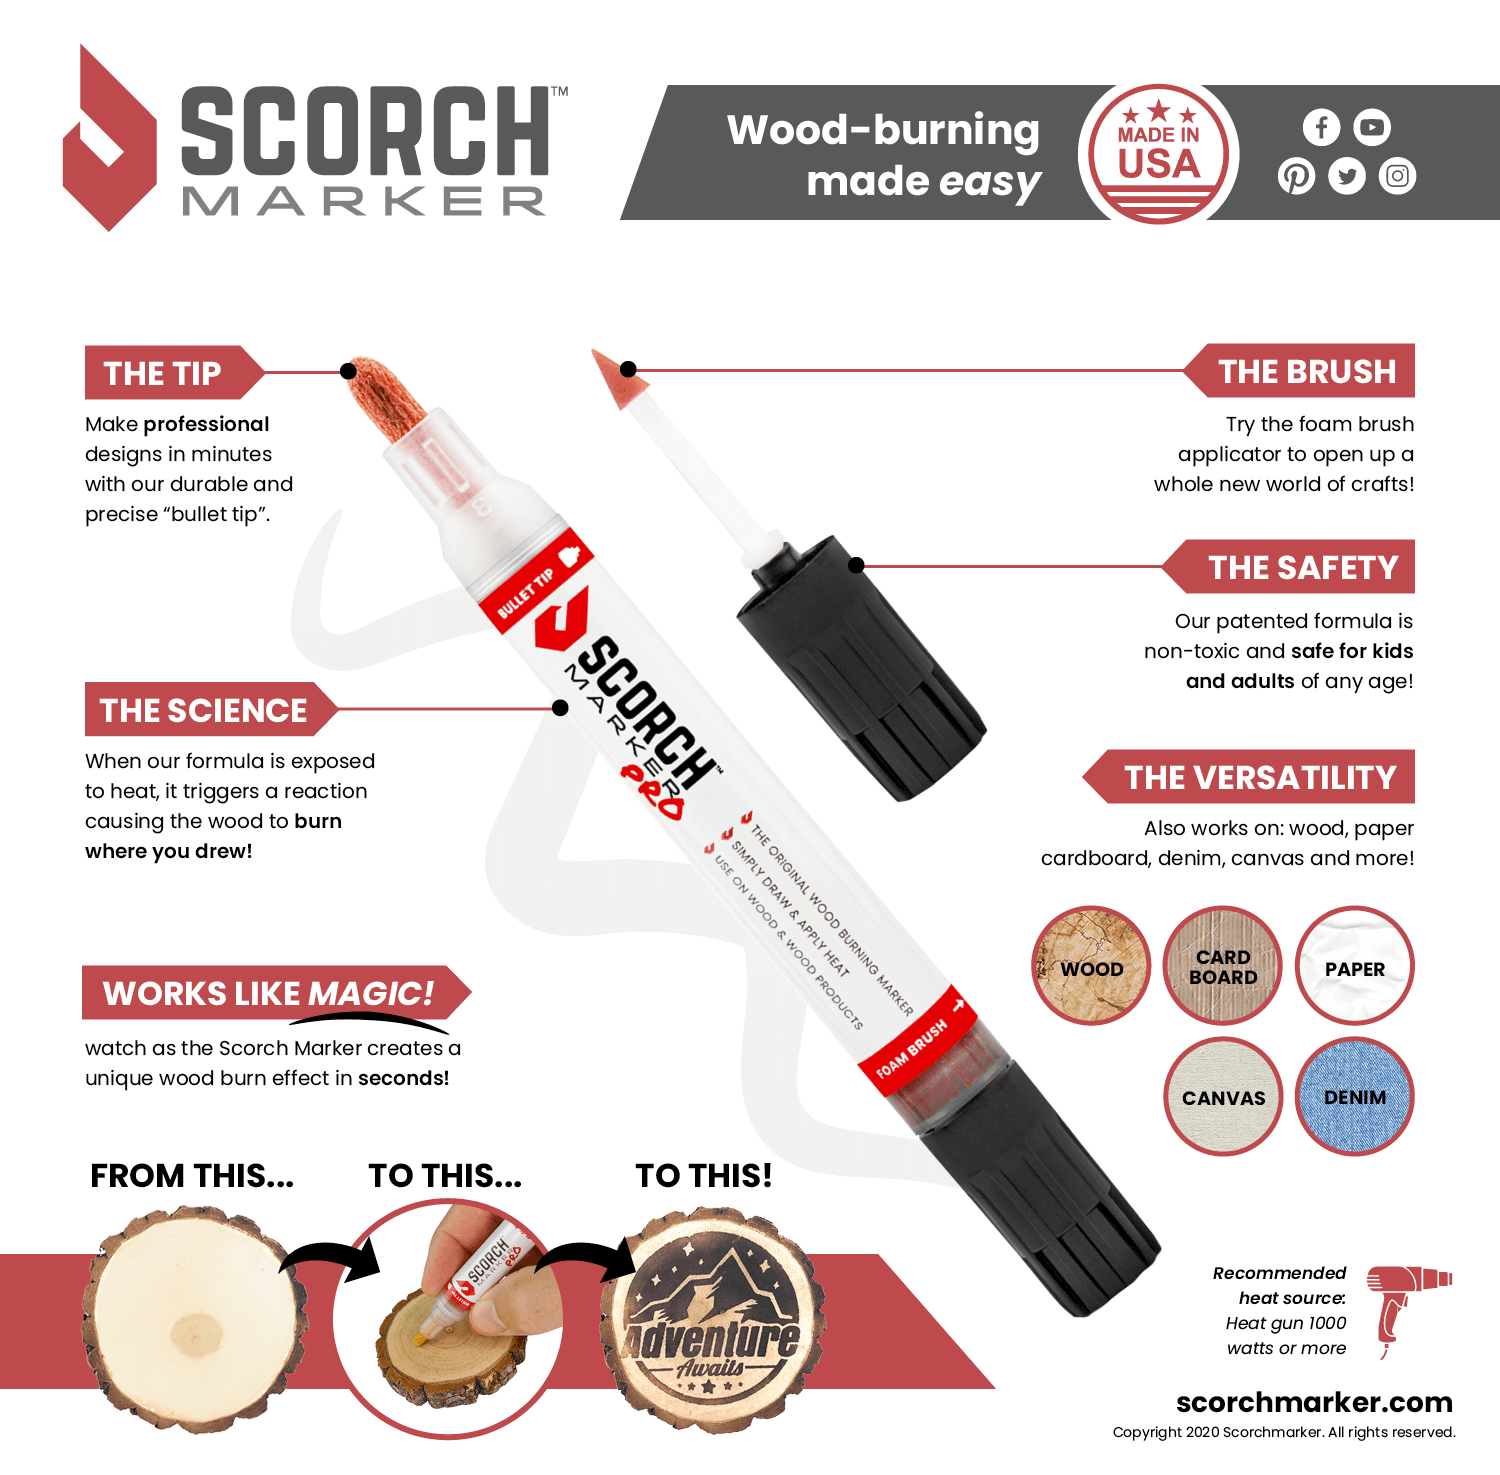 How to Properly Prep Your Wood Surface for the Scorch Marker